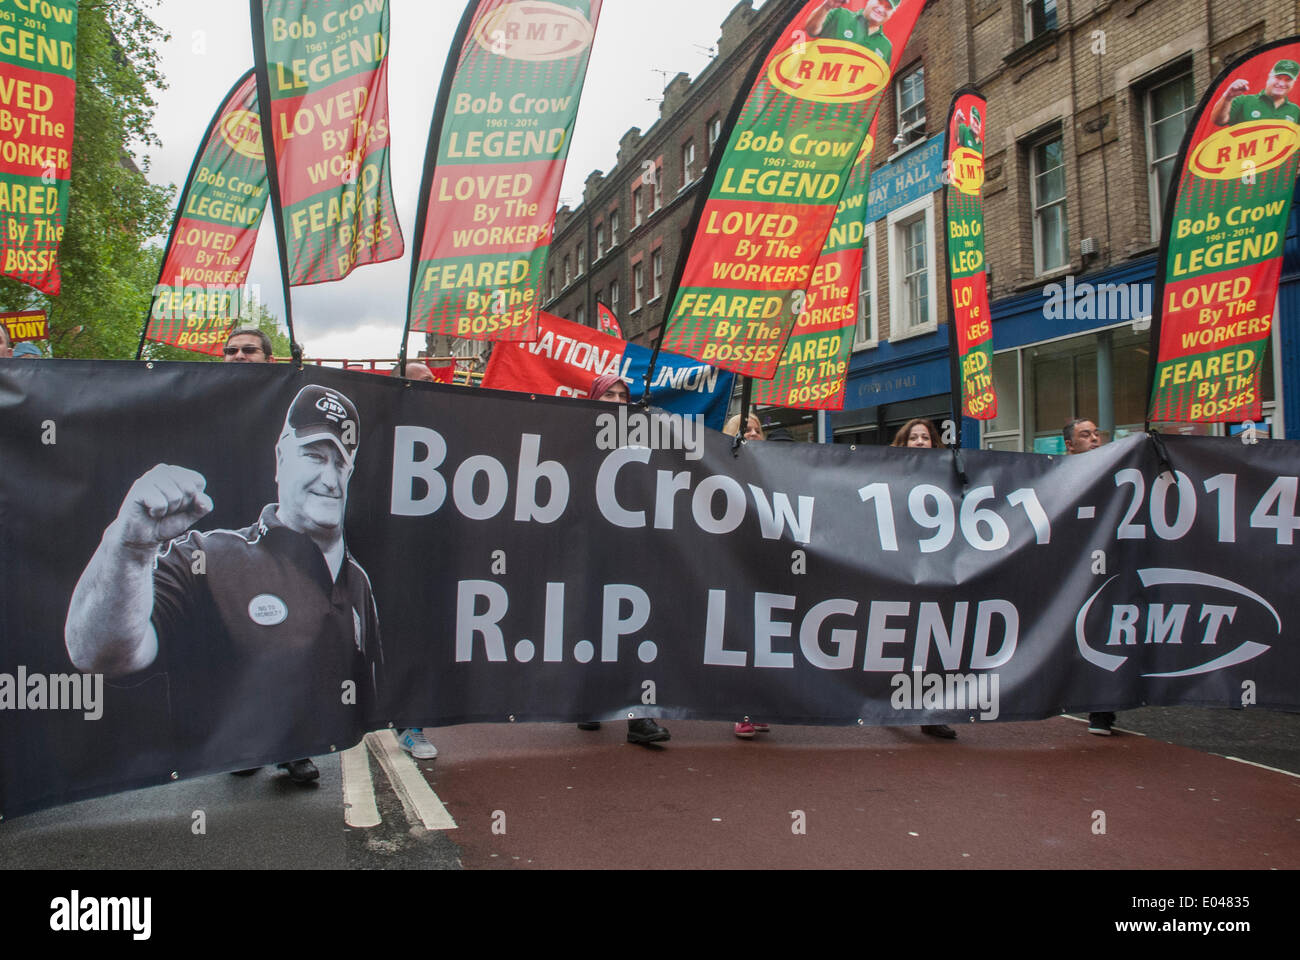 London, UK. 01st May, 2014. Supporters wave flags and hold a large banner during the May Day march honoring Bob Crow who led the RMT union before he passed away in March 2014. London, UK. Credit:  Peter Manning/Alamy Live News Stock Photo